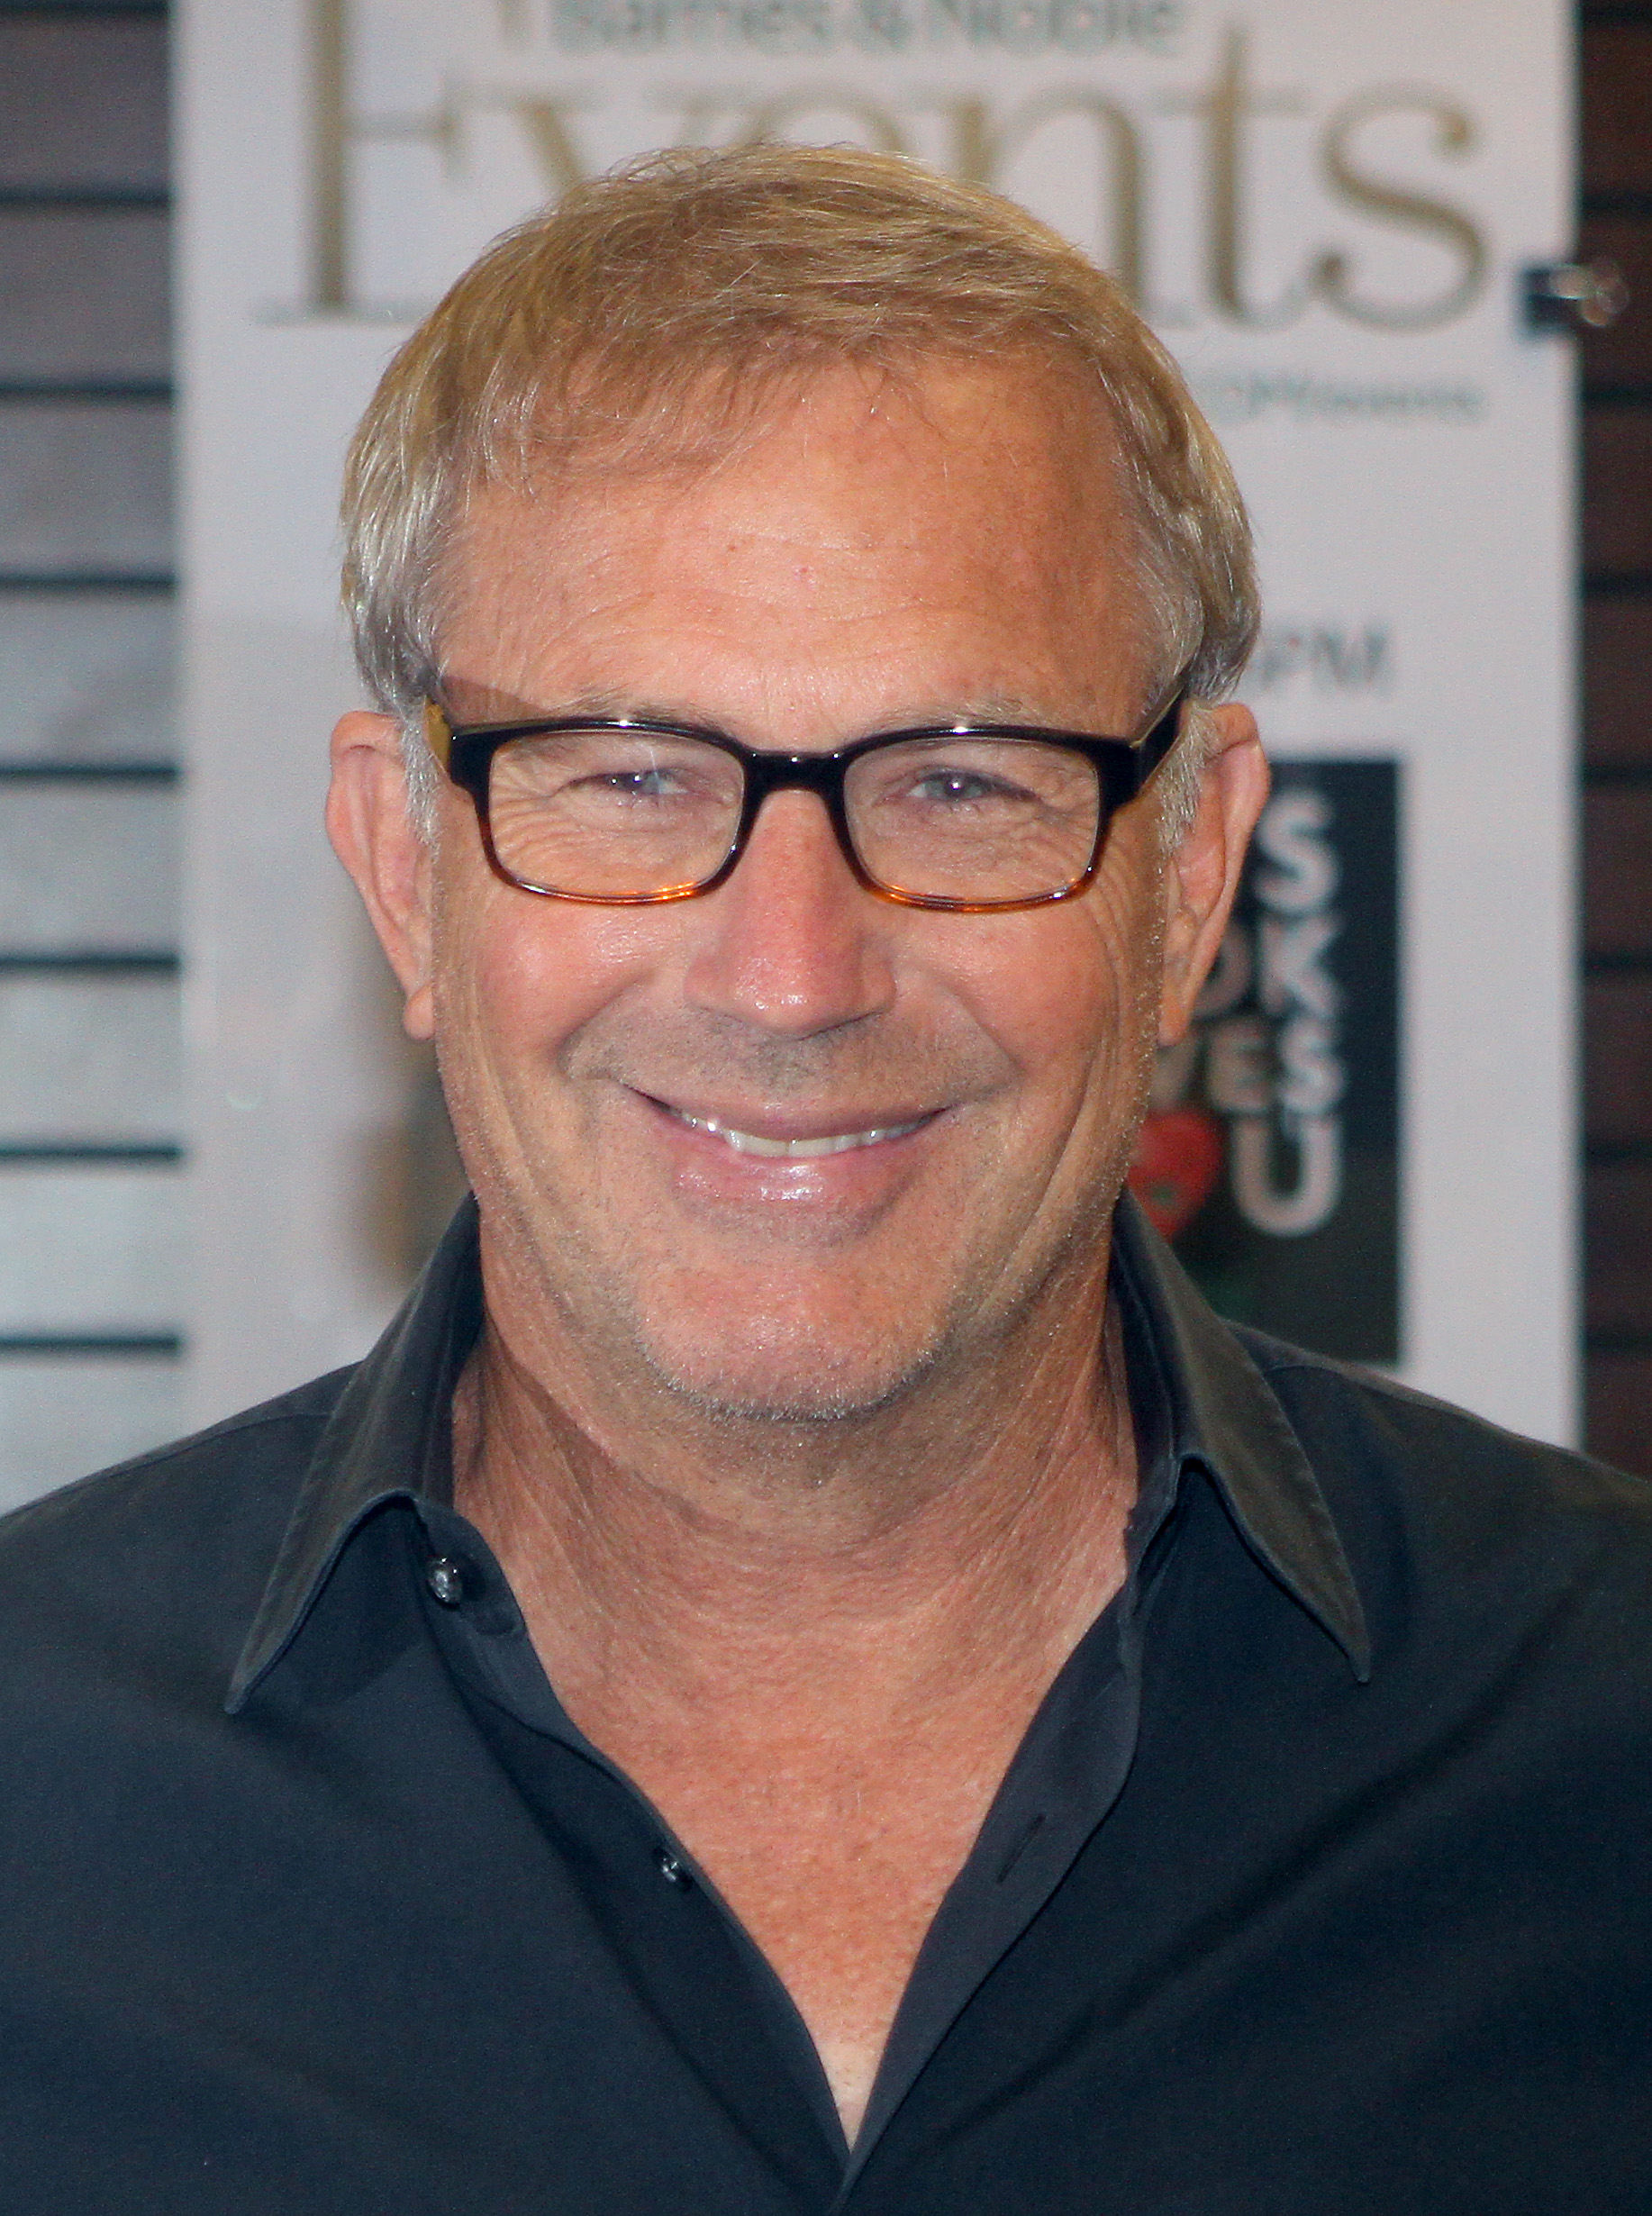 Kevin Costner in Los Angeles, California on October 27, 2015 | Source: Getty Images